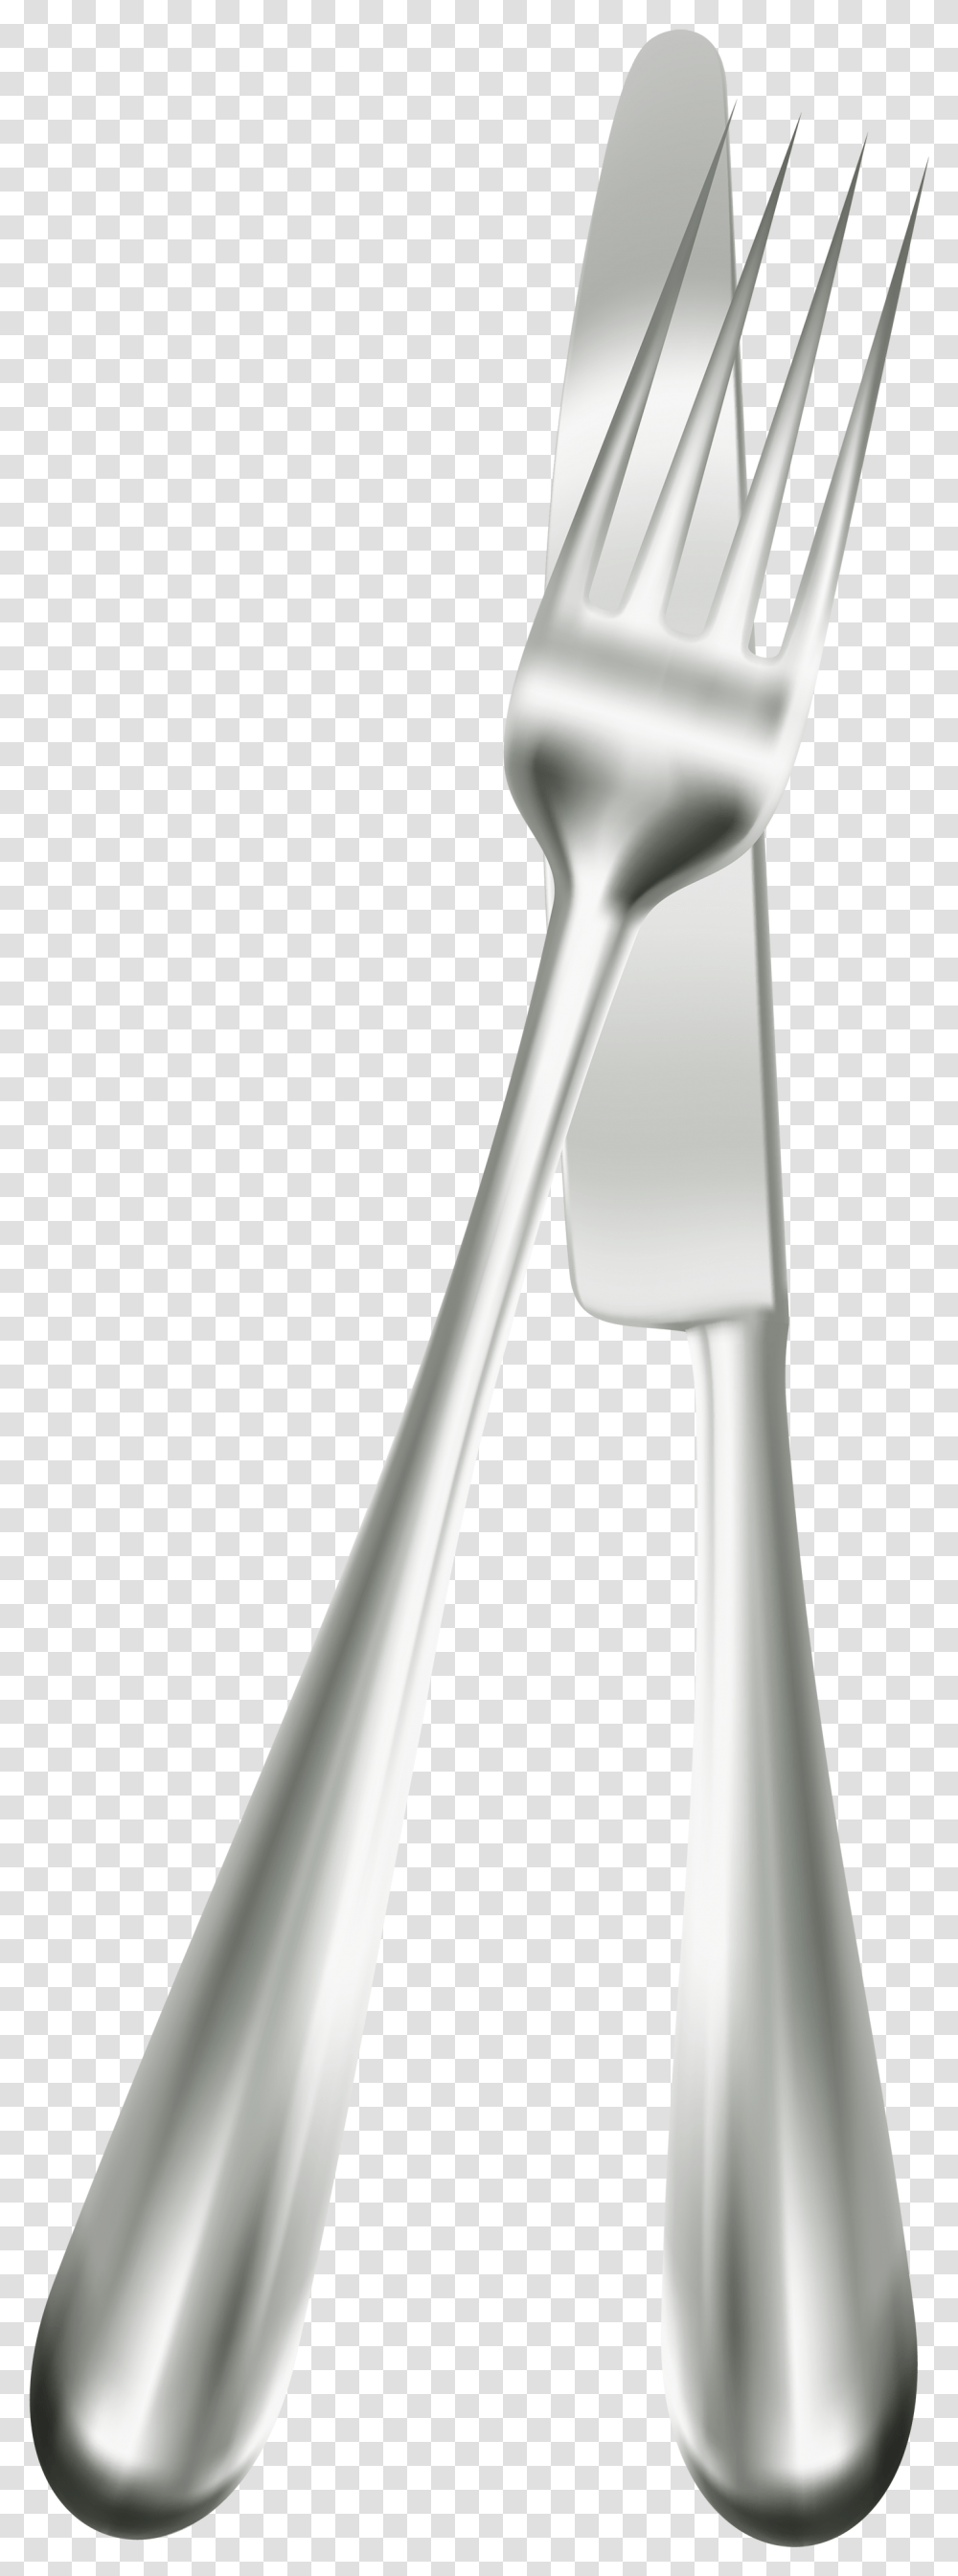 Table Fork And Knife Clipart Fork And Knife, Cutlery, Spoon, Tool, Can Opener Transparent Png